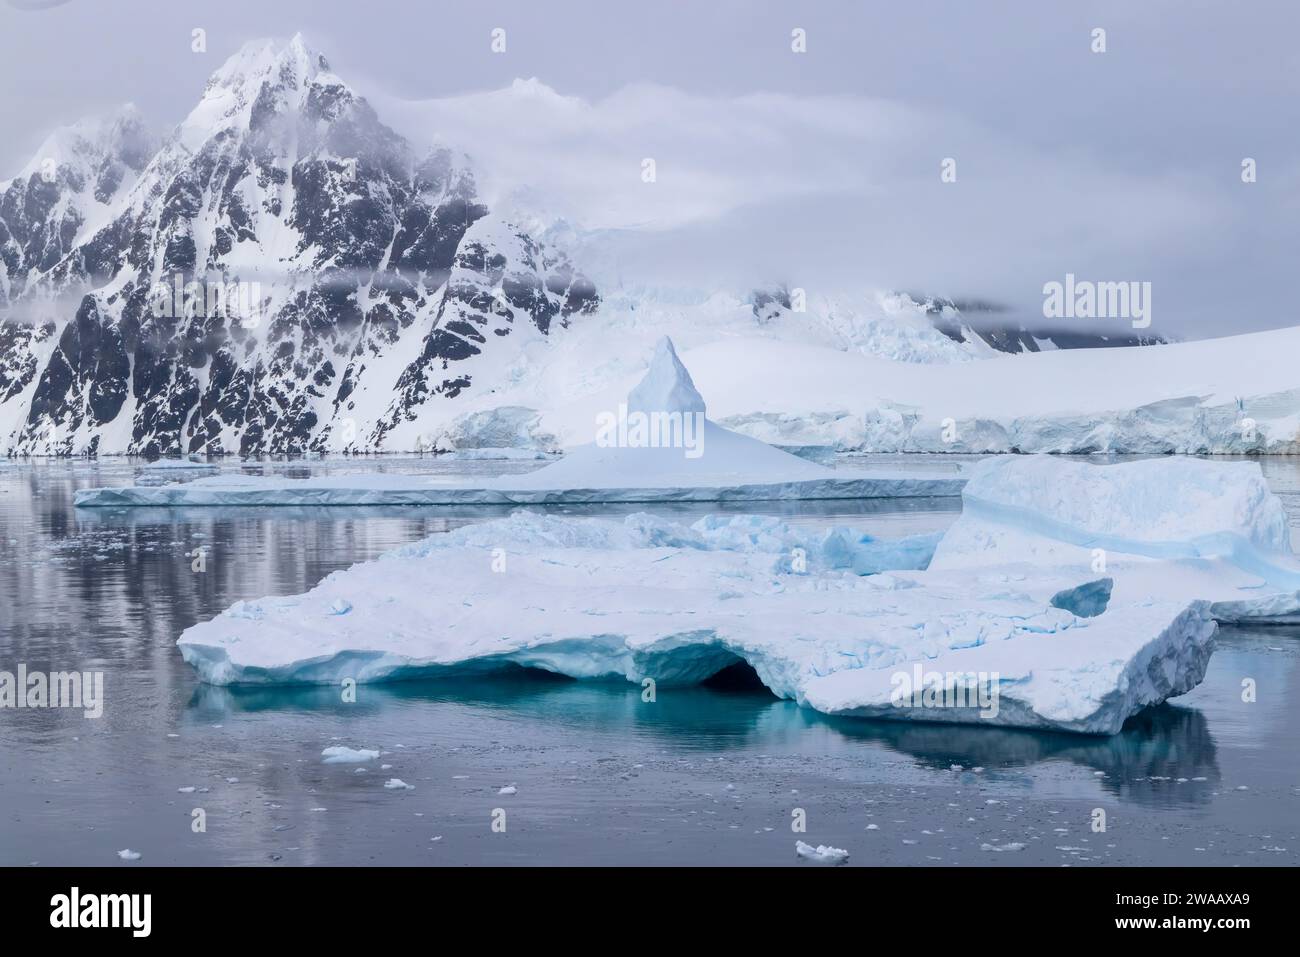 Ice, snow, and moutains near the Lemaire Channel in Antartica. Stock Photo